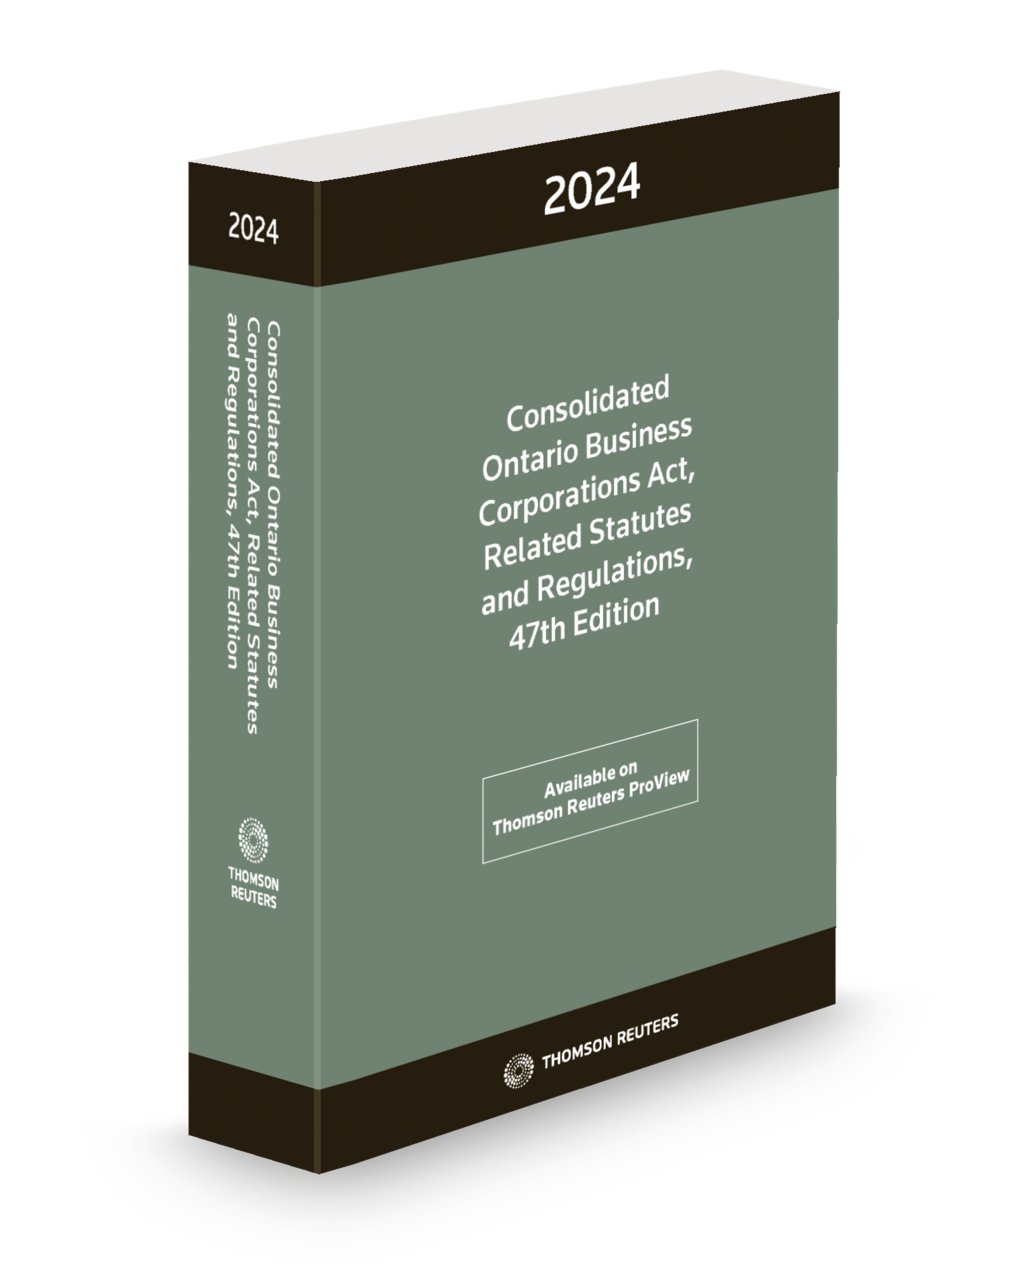 cover of Consolidated Ontario Business Corporations Act, Related Statutes and Regulations 2024, 47th Edition